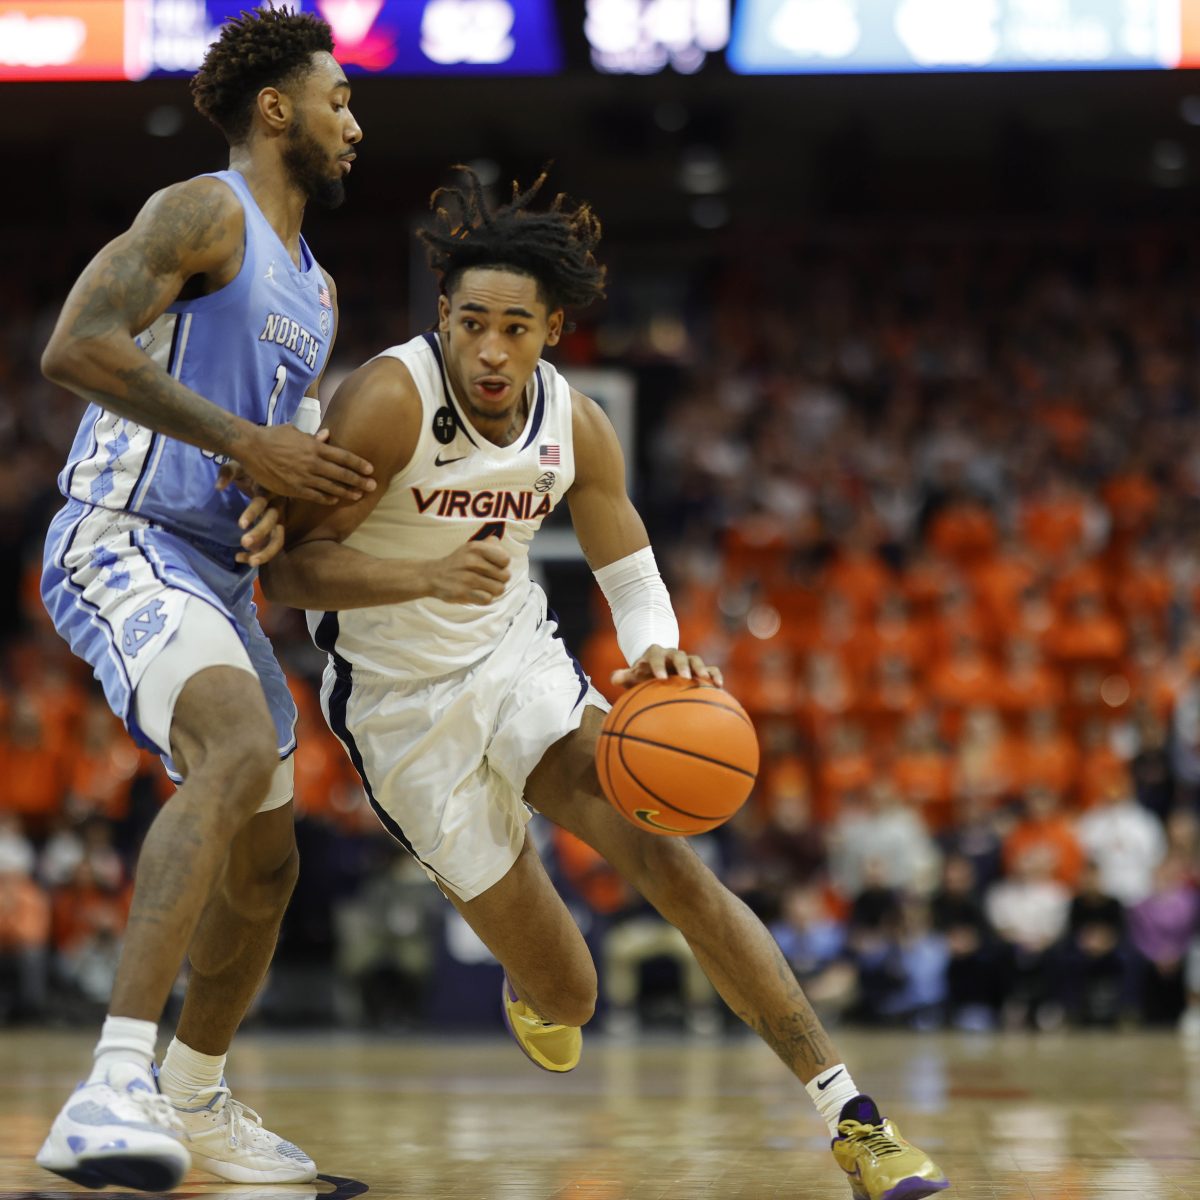 Notre Dame vs. Virginia Prediction, Preview, and Odds – 2-18-2023